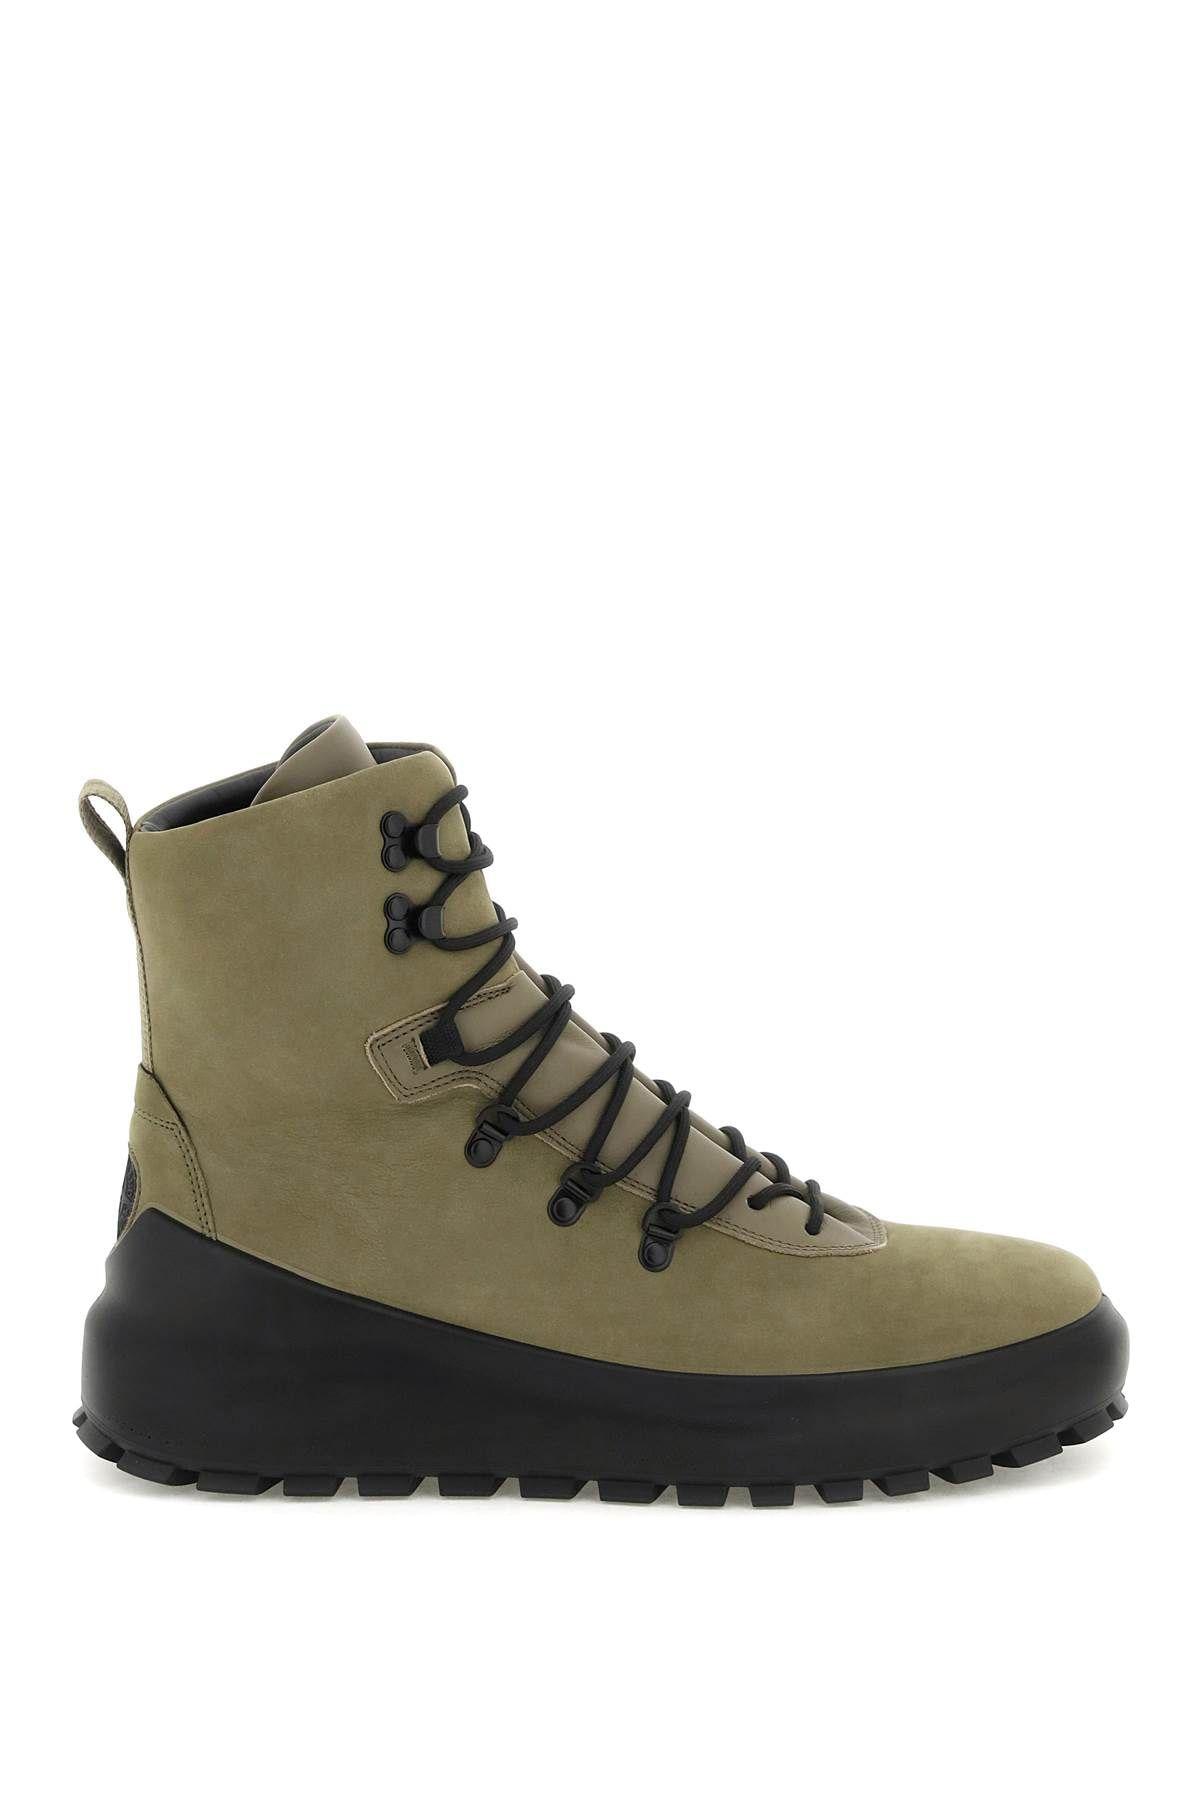 Stone Island Suede Leather Lace-up Ankle Boots